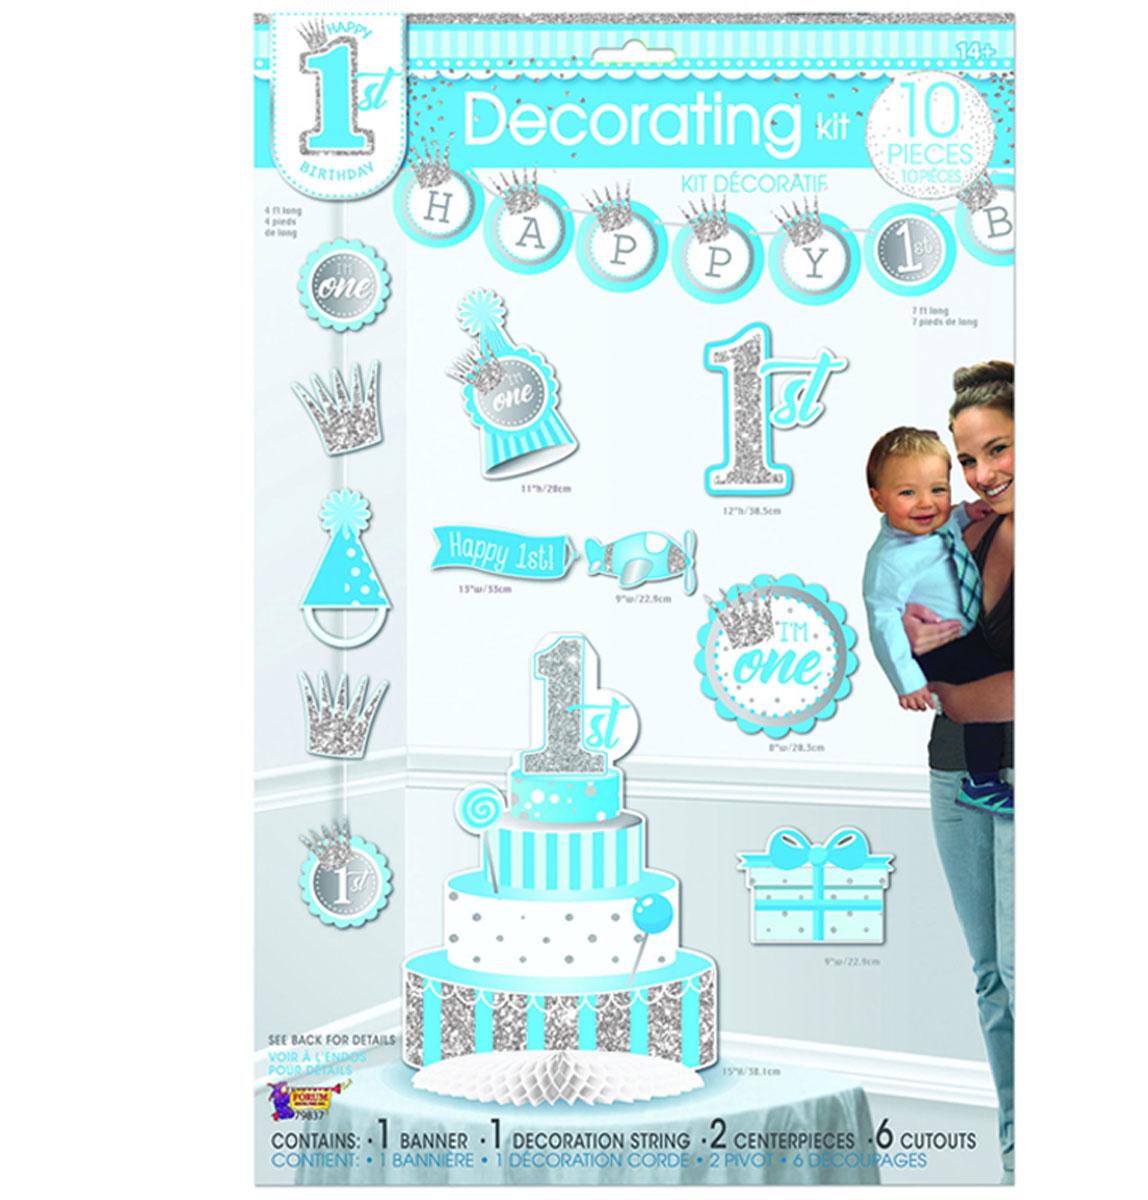 10pc Boy's 1st Birthday Party Decorating Kit by Forum Novelties 79837 available in the UK here at Karnival Costumes online party shop